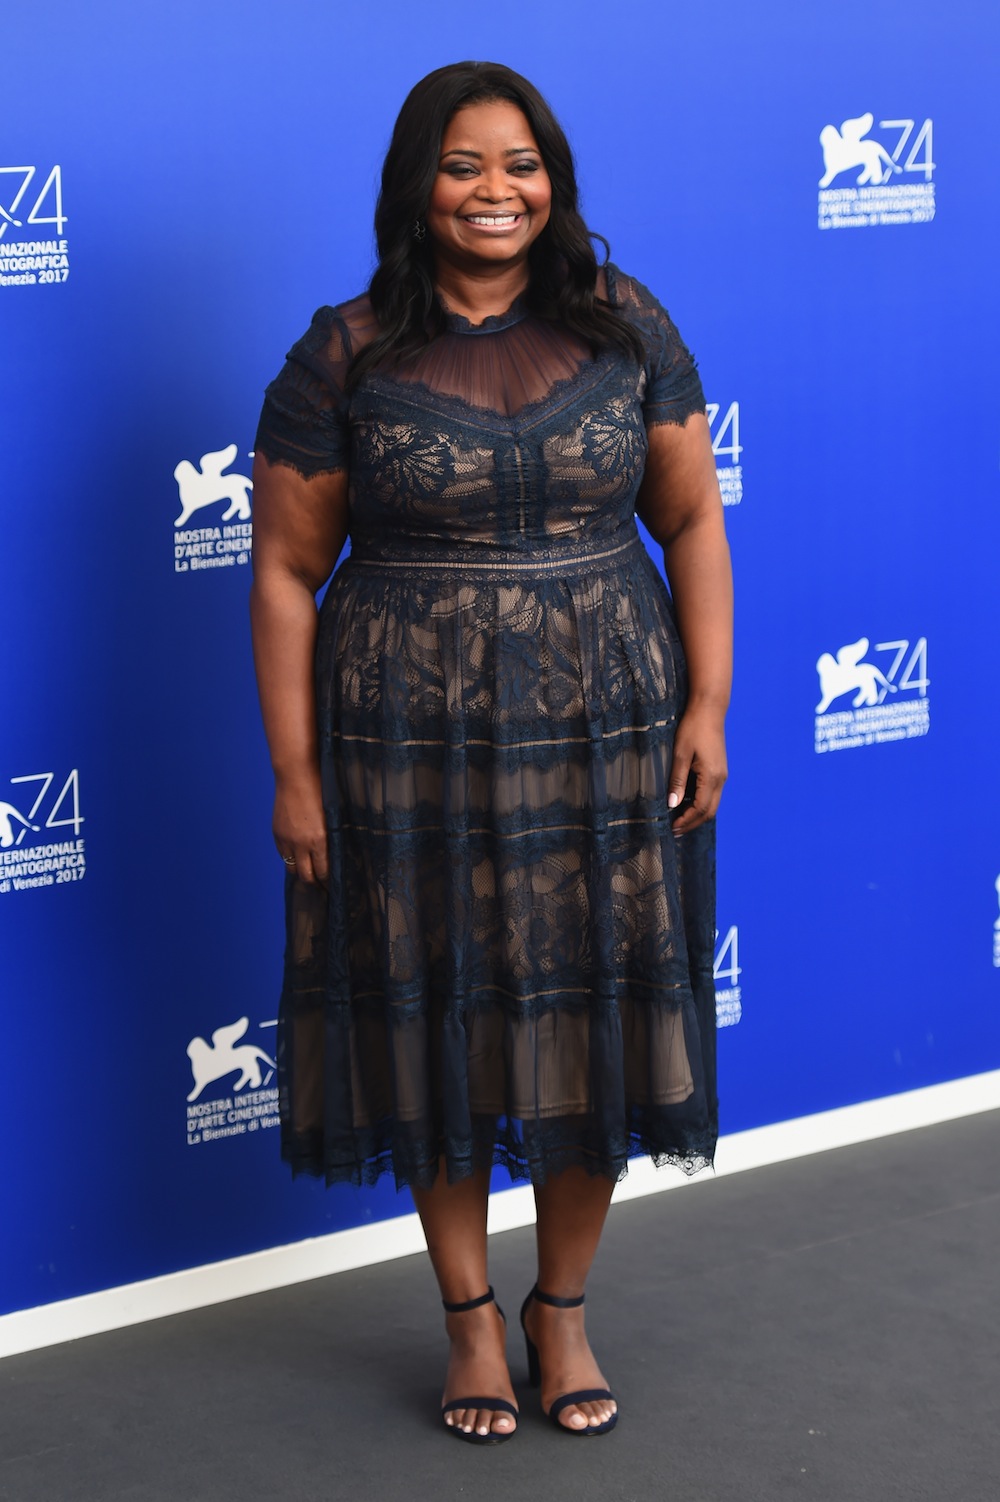 Octavia Spencer attends the 'The Shape Of Water' photocall during the 74th Venice Film Festival